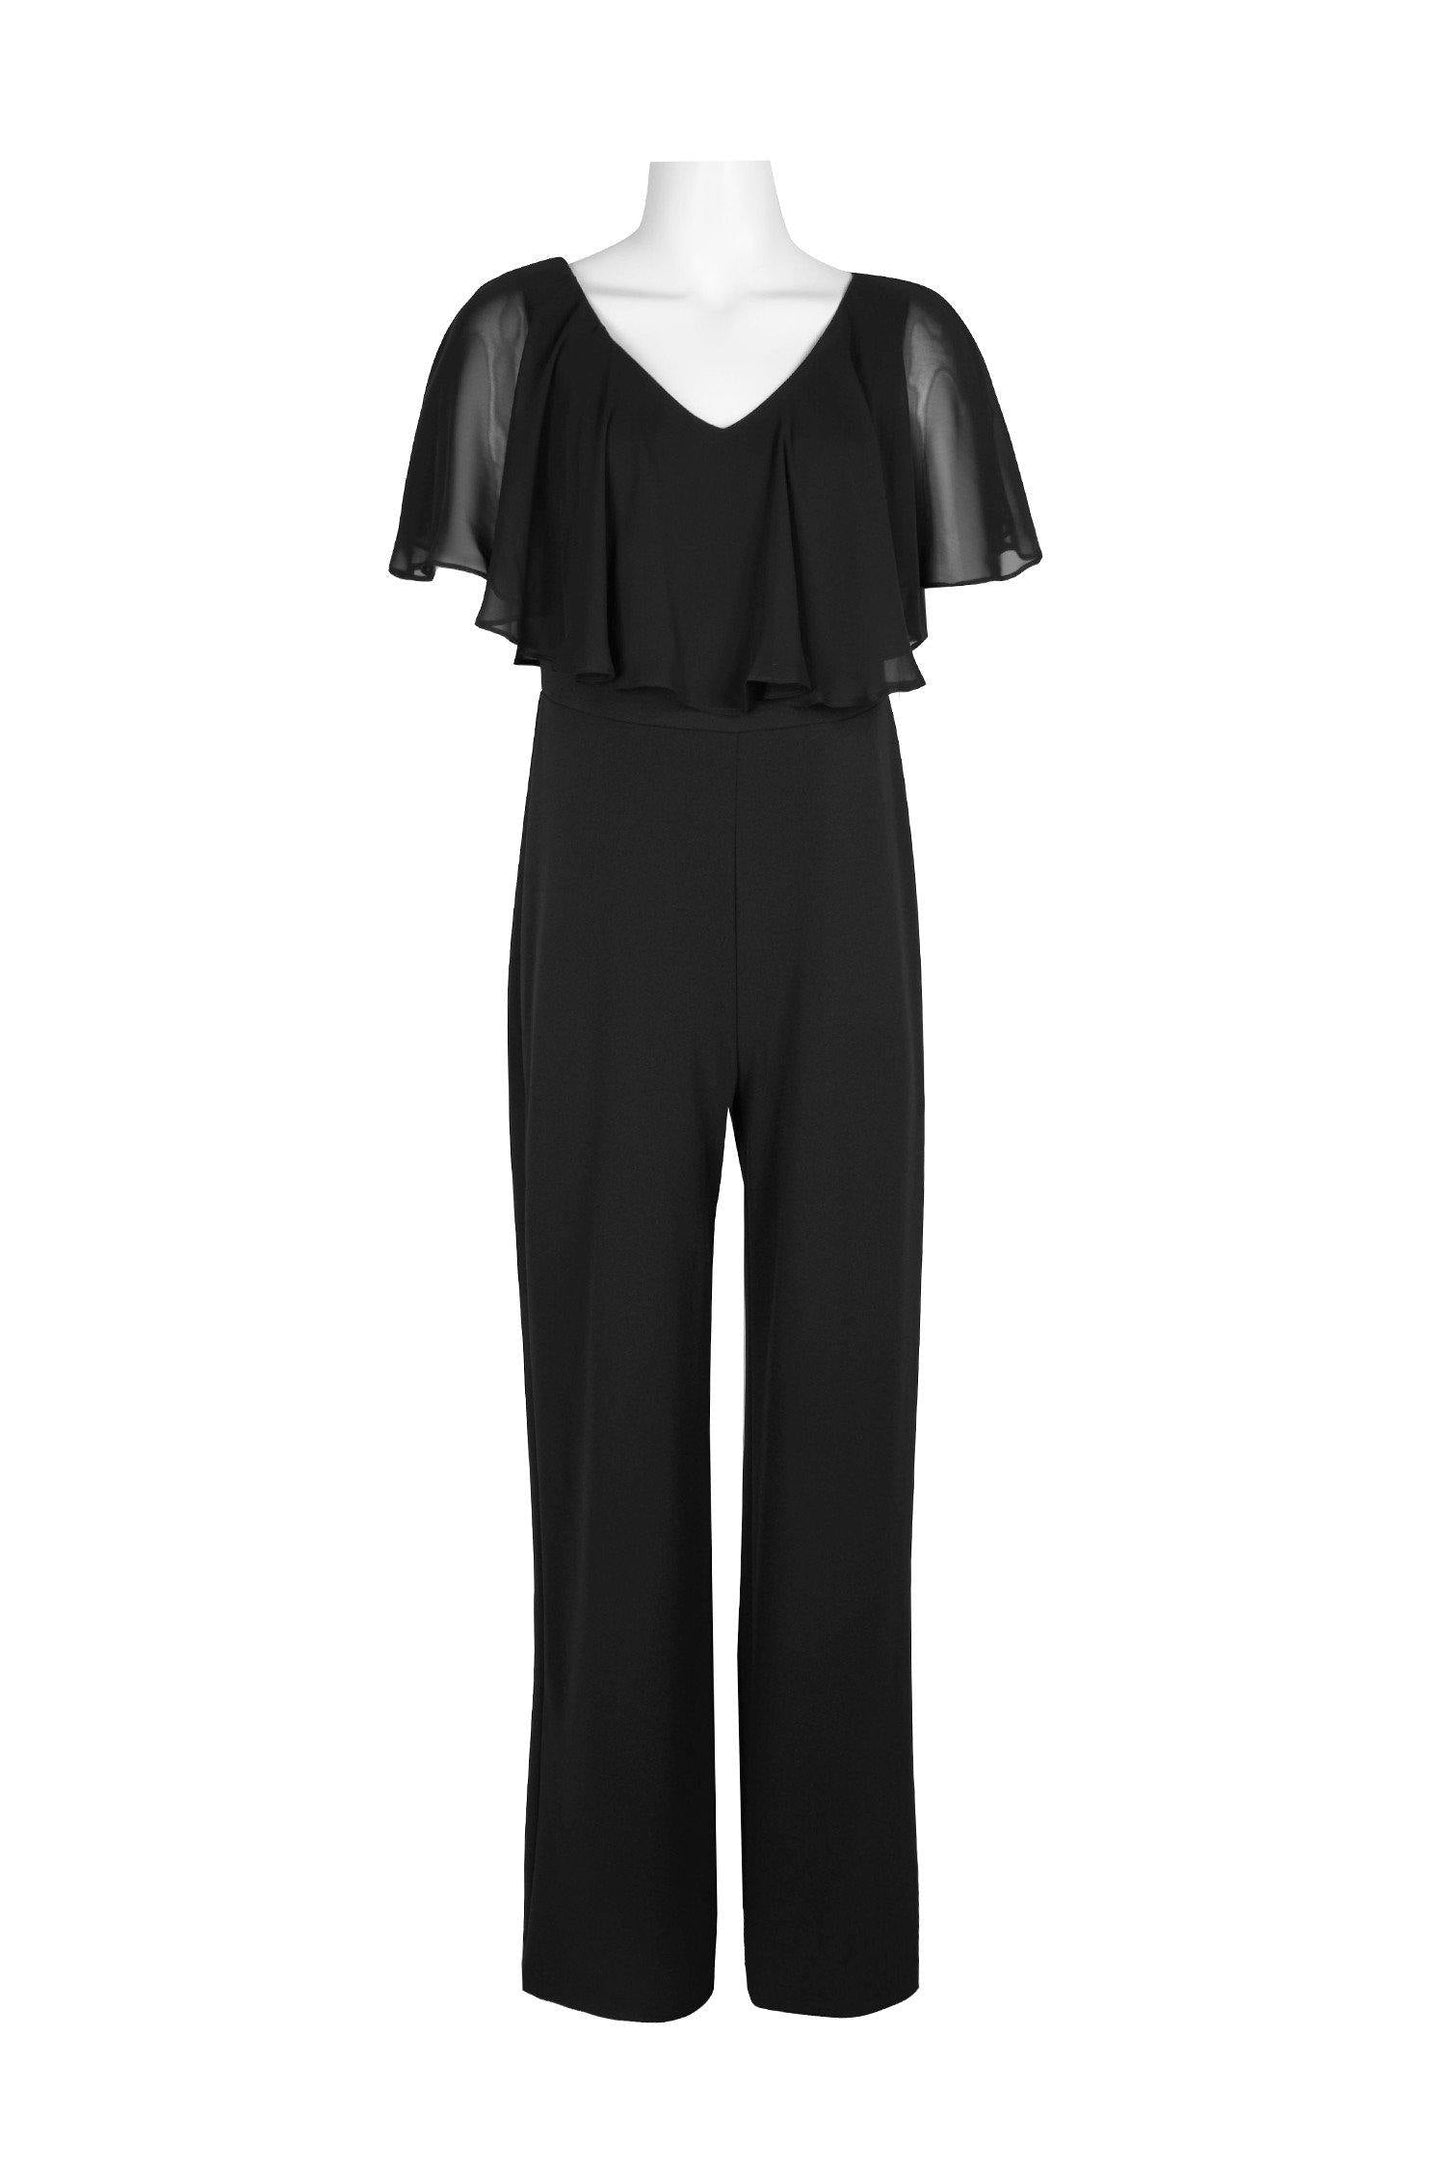 Connected Apparel Formal Cape Sleeve Jumpsuit - The Dress Outlet